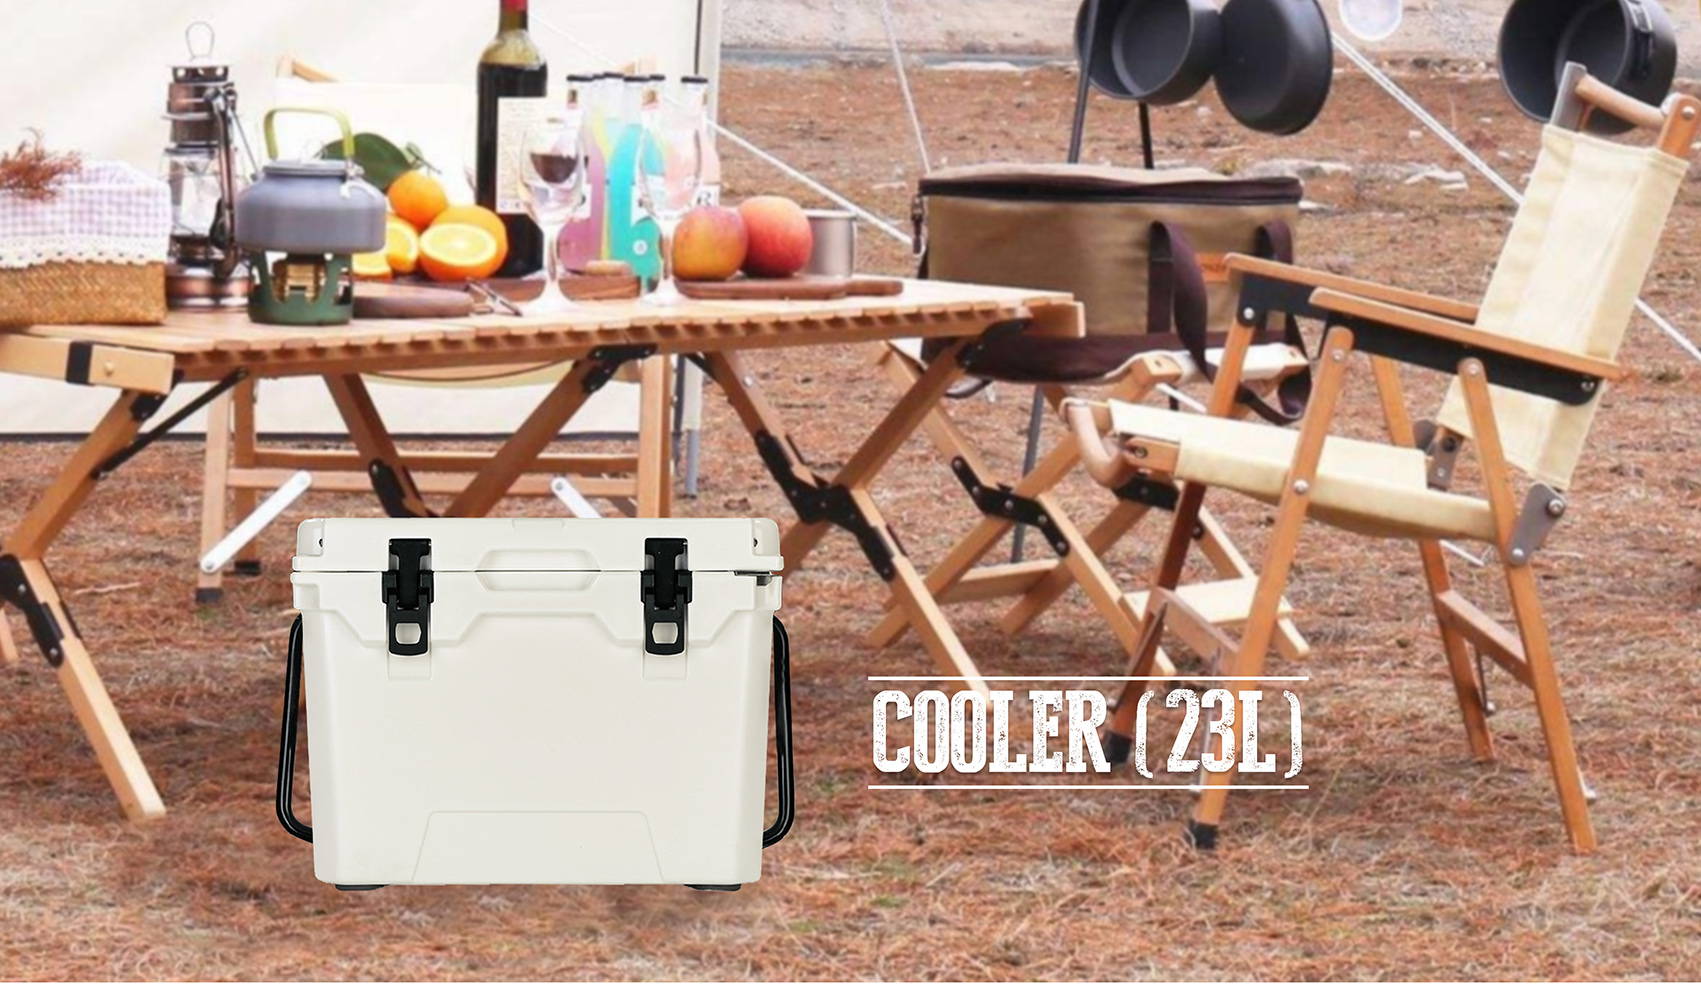 When camping, the white 23-liter cooler contains a lot of drinks